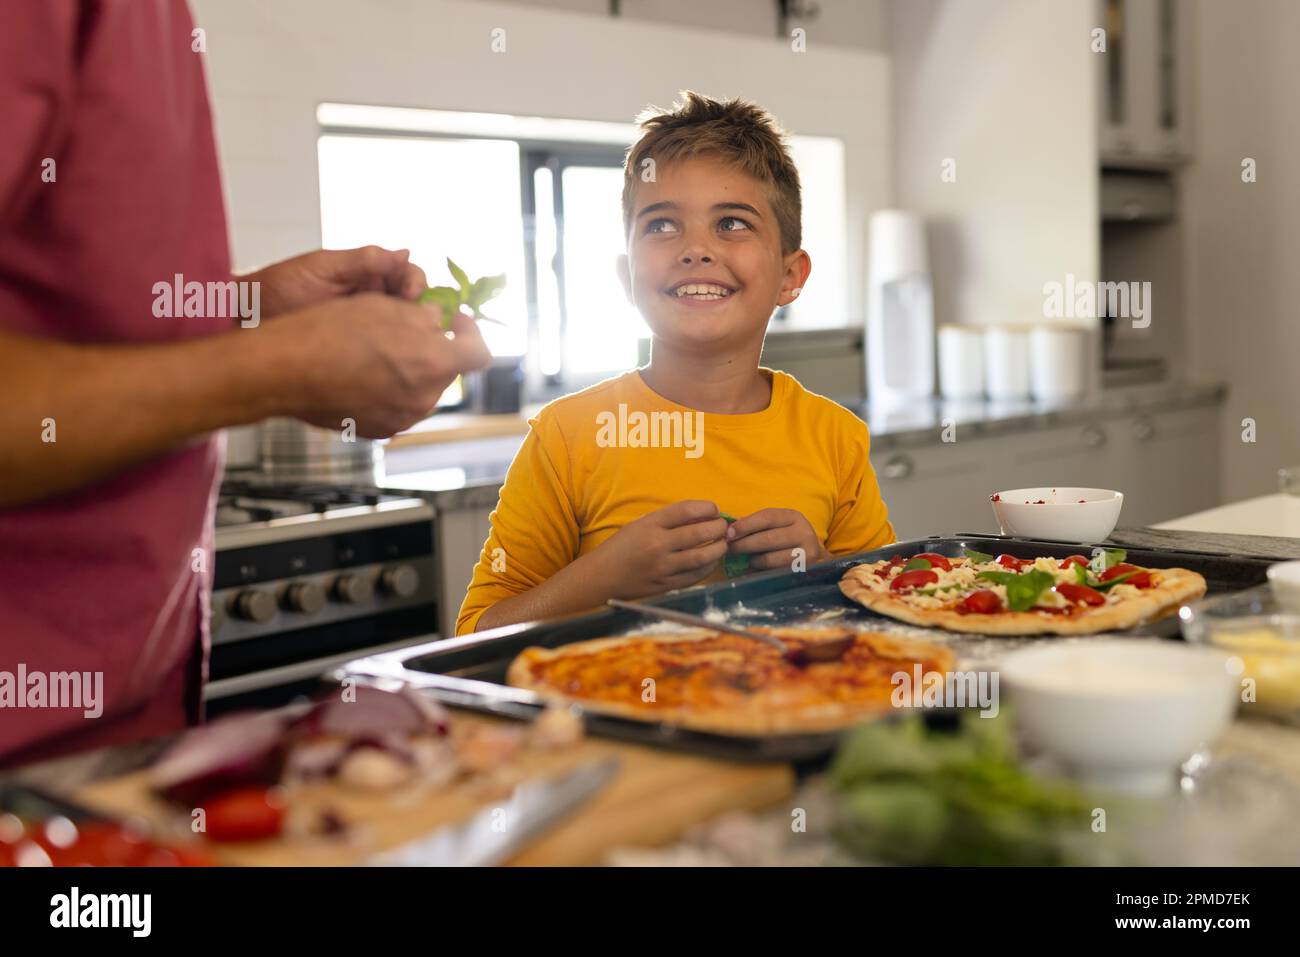 Midsection of caucasian grandfather with cute smilig grandson preparing pizza on kitchen island Stock Photo